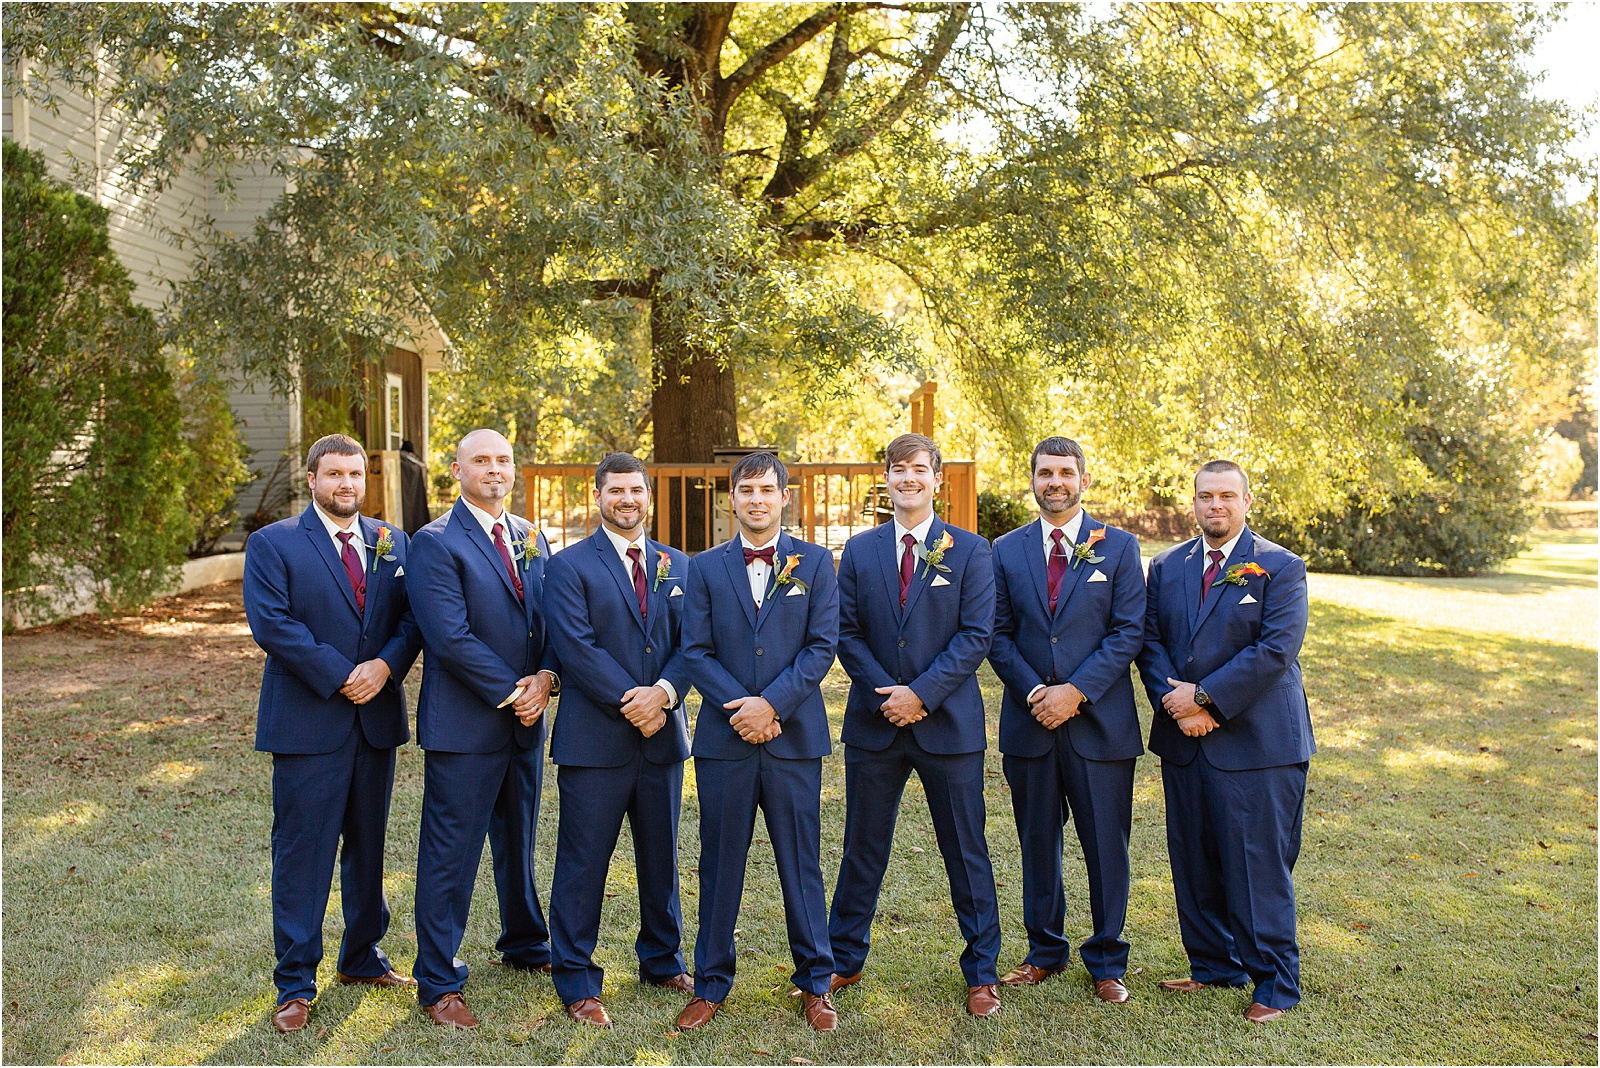 Groom with friends in navy suits and red time outside for pictures